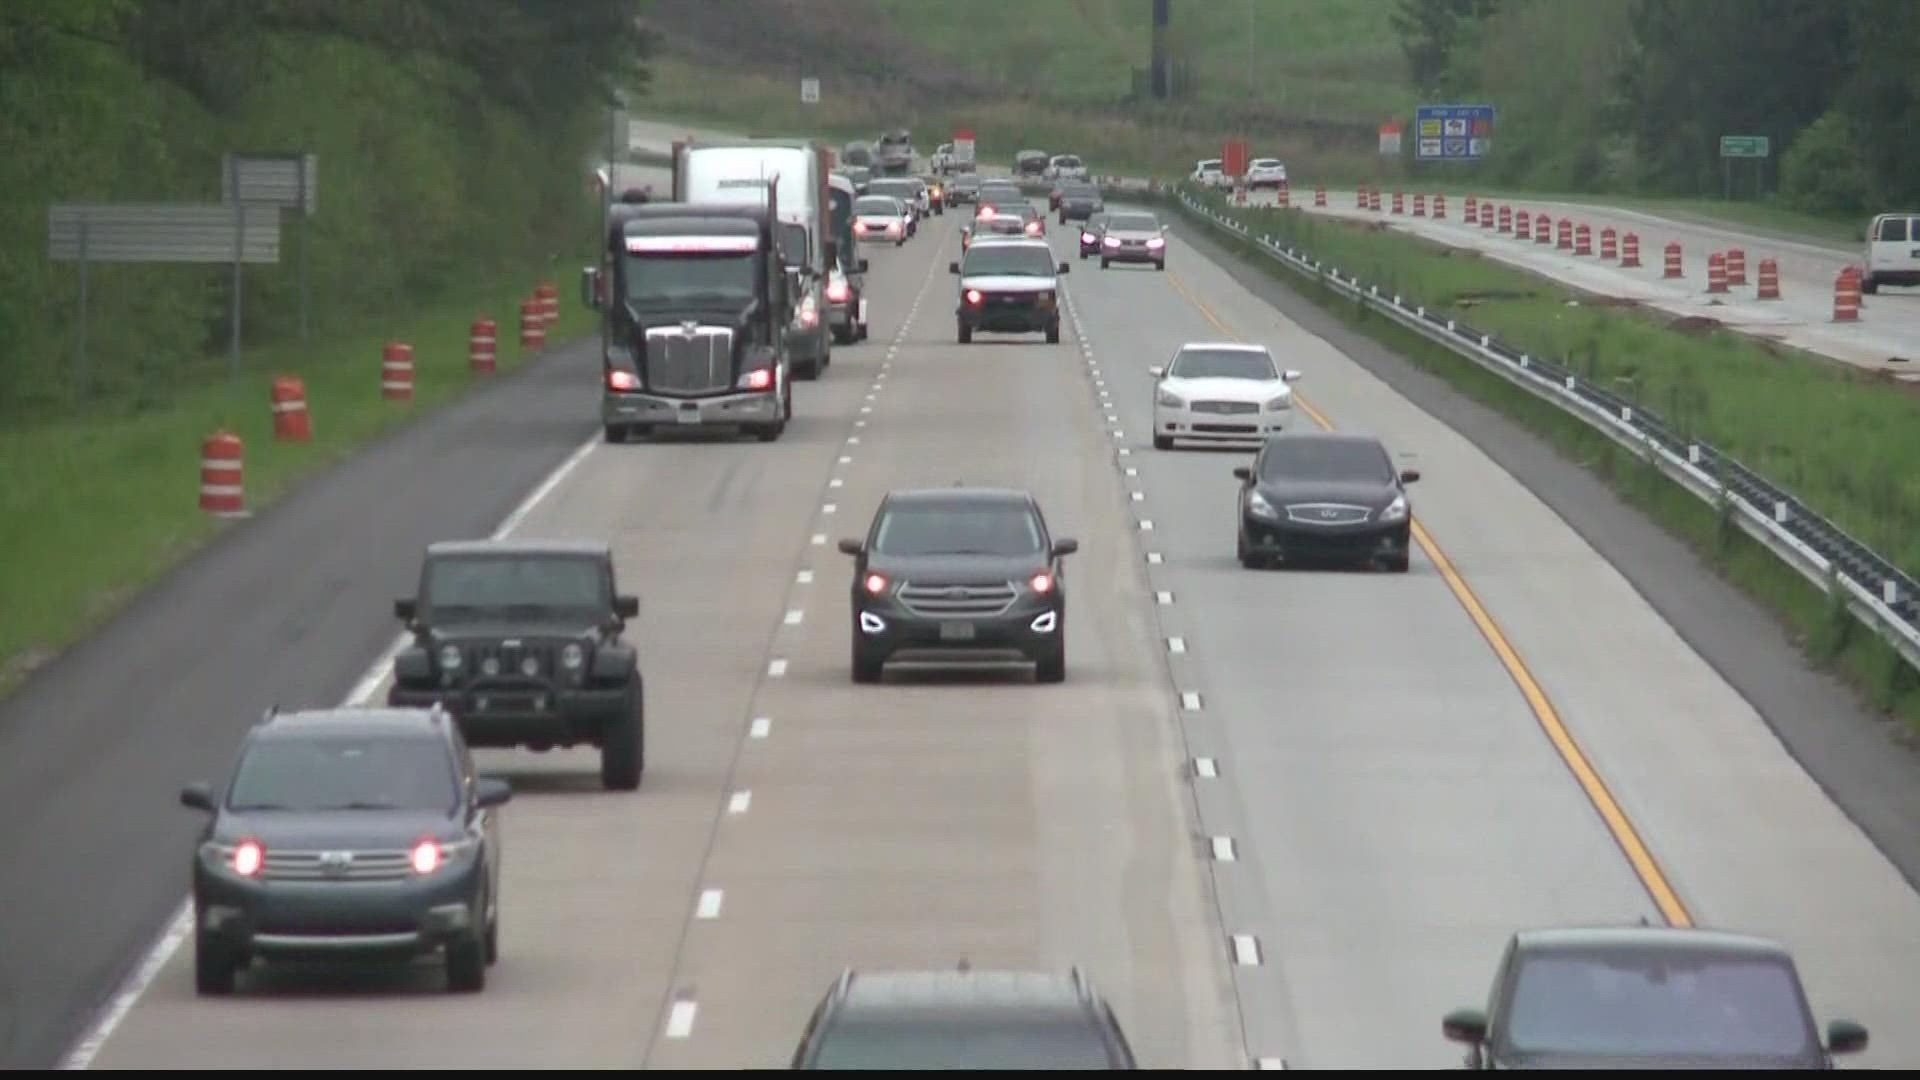 GDOT hopes to begin construction in 2023.